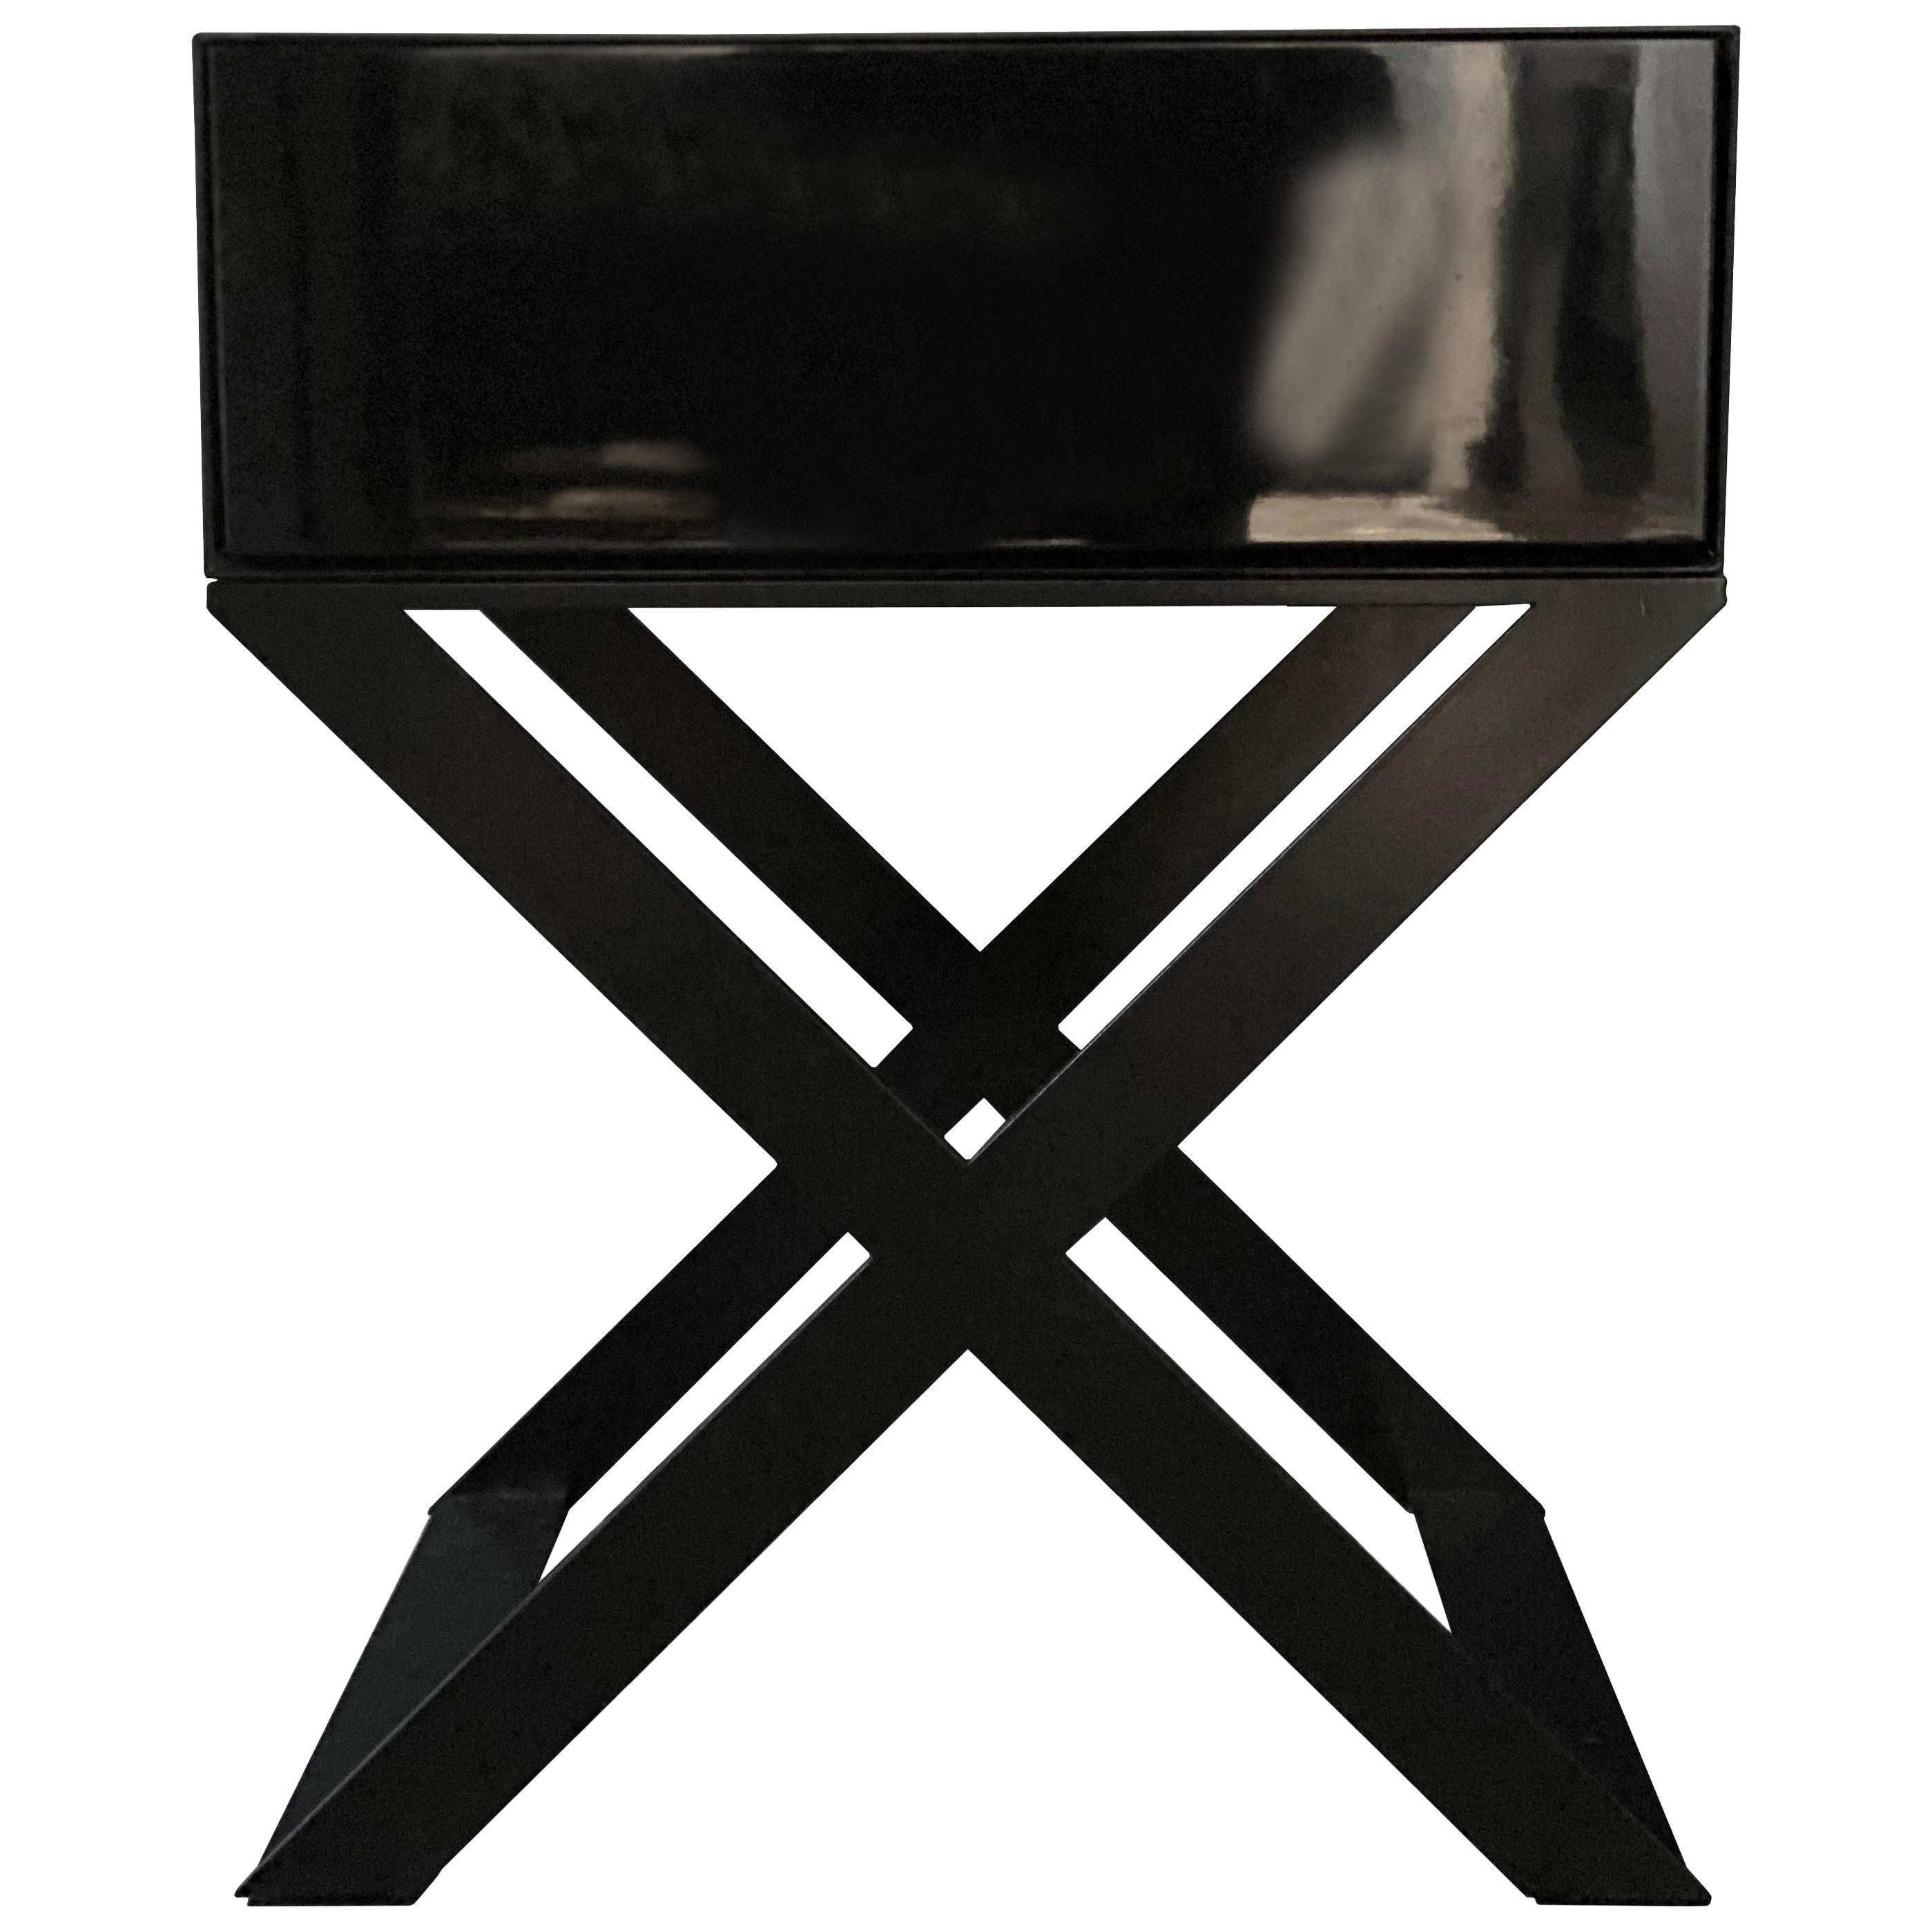 Custom Made X-Leg Bedside Table in Black Lacquered and Black Powder Coated Legs